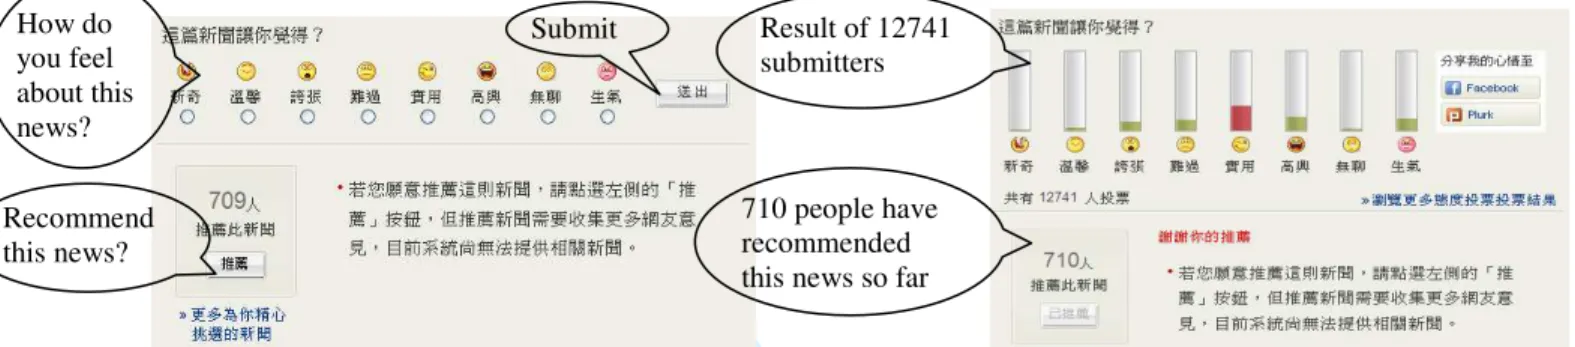 Fig 1. The Yahoo News in Taiwan (accessed date 10/25/2010) 